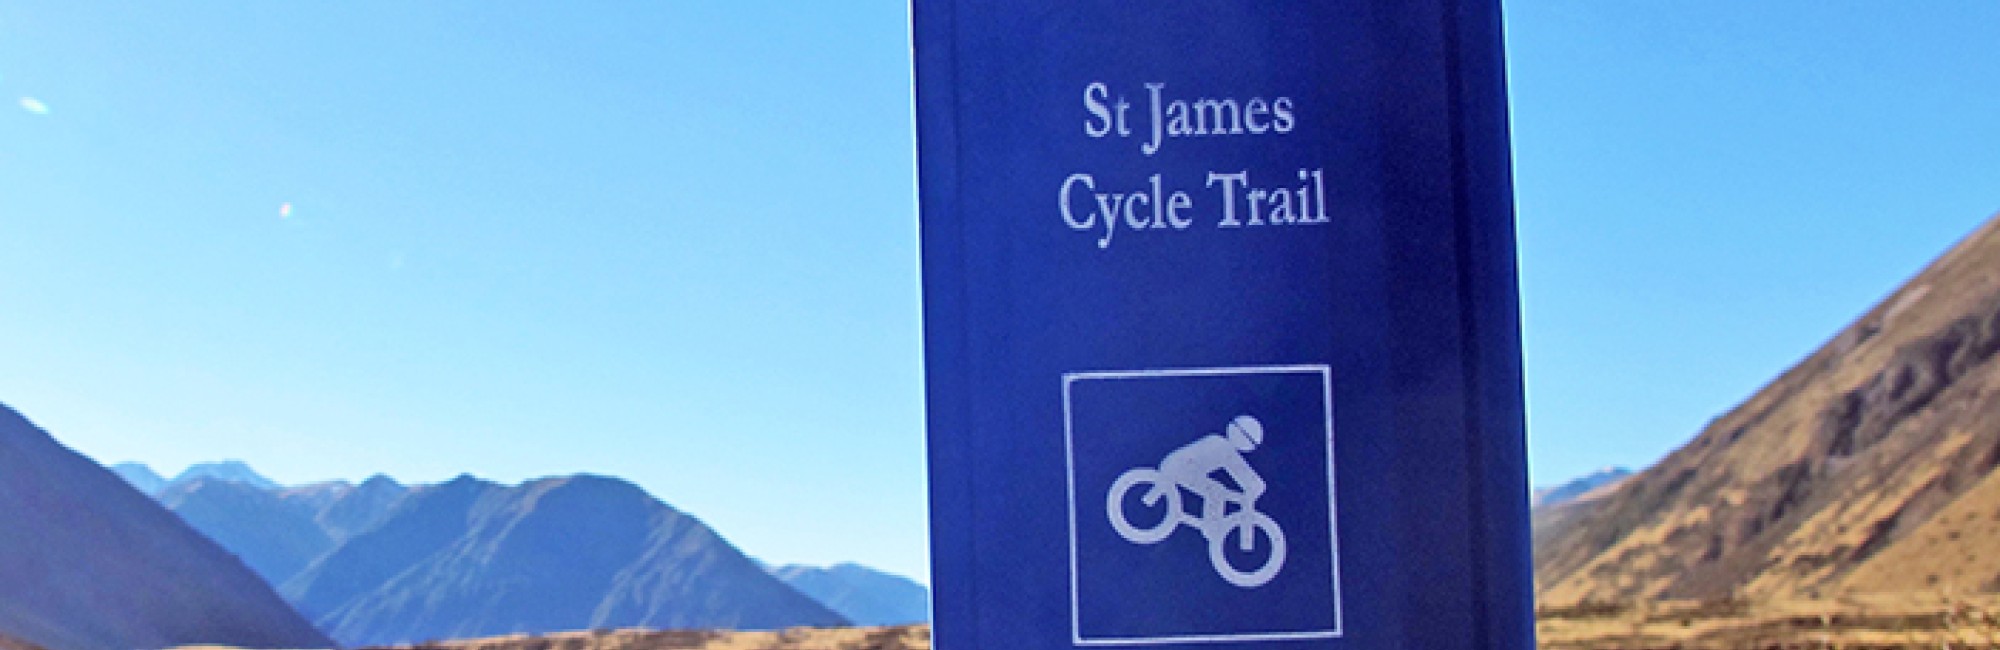 St James Cycleway Trail Advanced Sign credit bennettandslater.co.nz landing